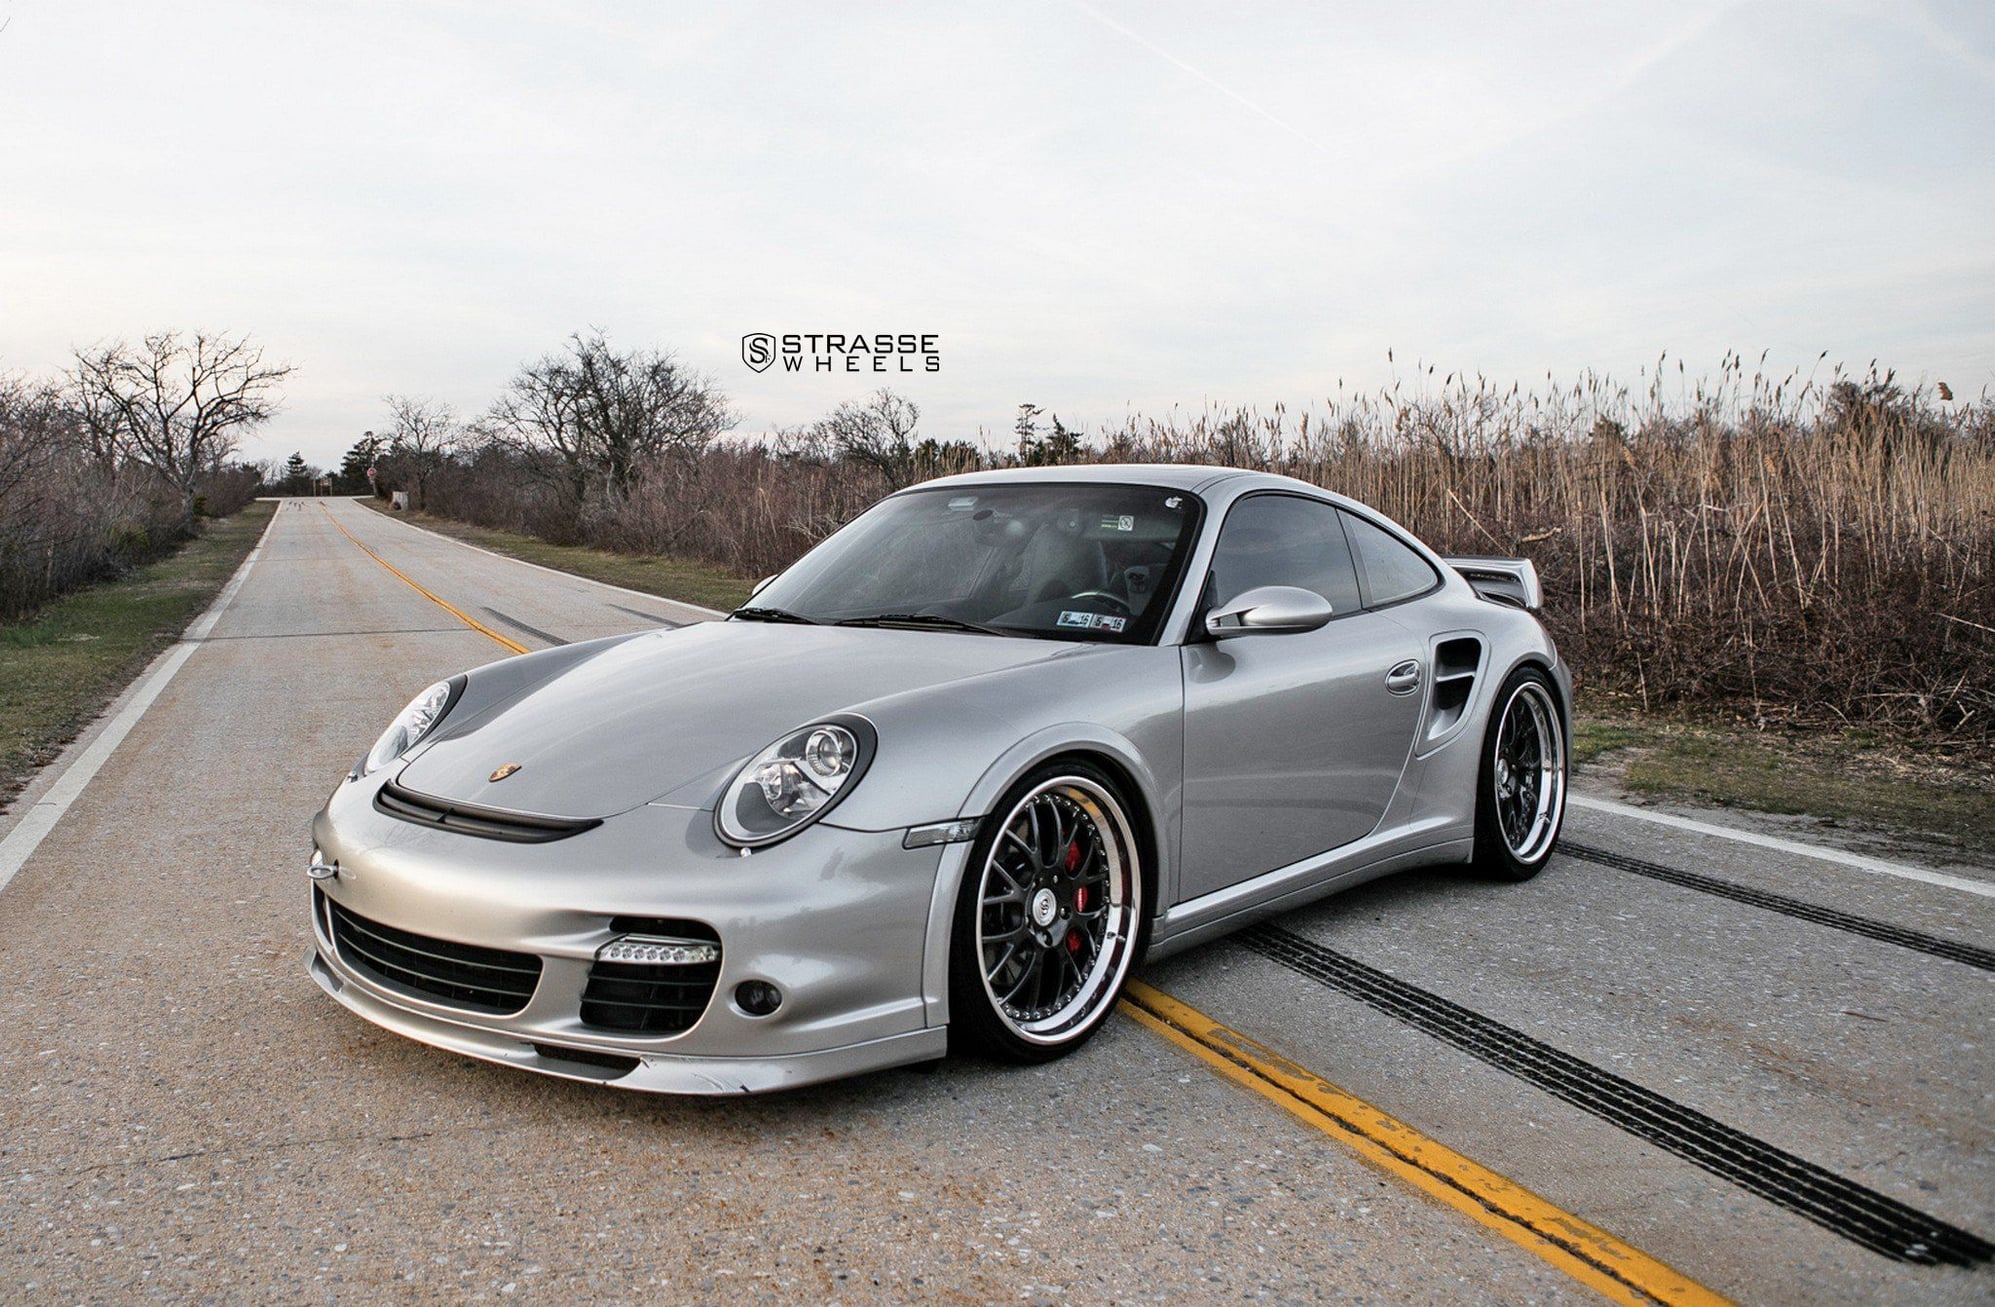 Wheels and Tires/Axles - Strasse SM8 19" wheels - Used - 2001 to 2015 Porsche 911 - Fort Lauderdale, FL 33309, United States